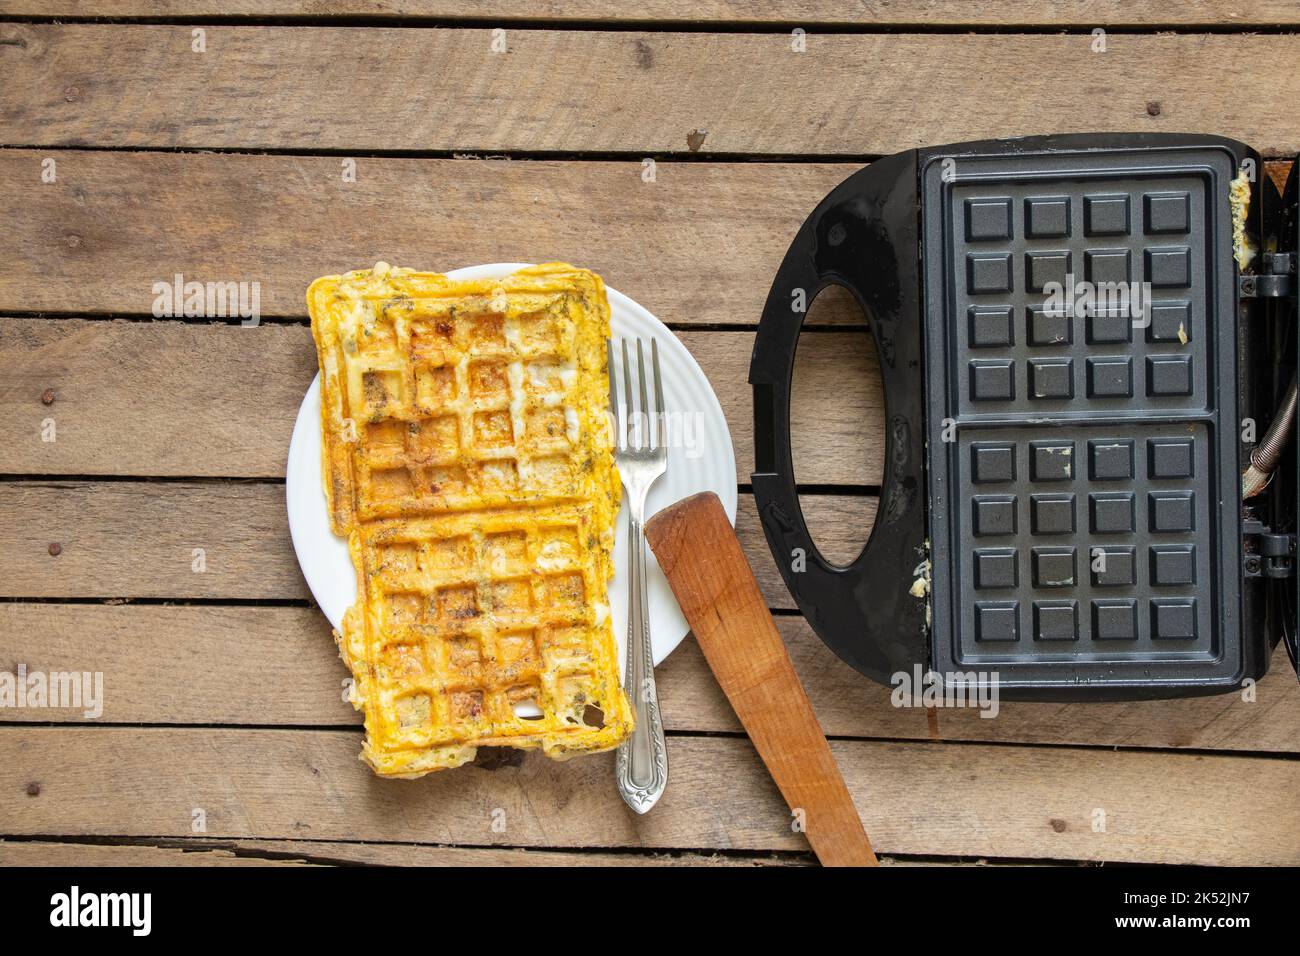 fry scrambled eggs with cheese and spices in a waffle iron on a wooden table in the kitchen, boil scrambled eggs in a waffle iron, breakfast Stock Photo